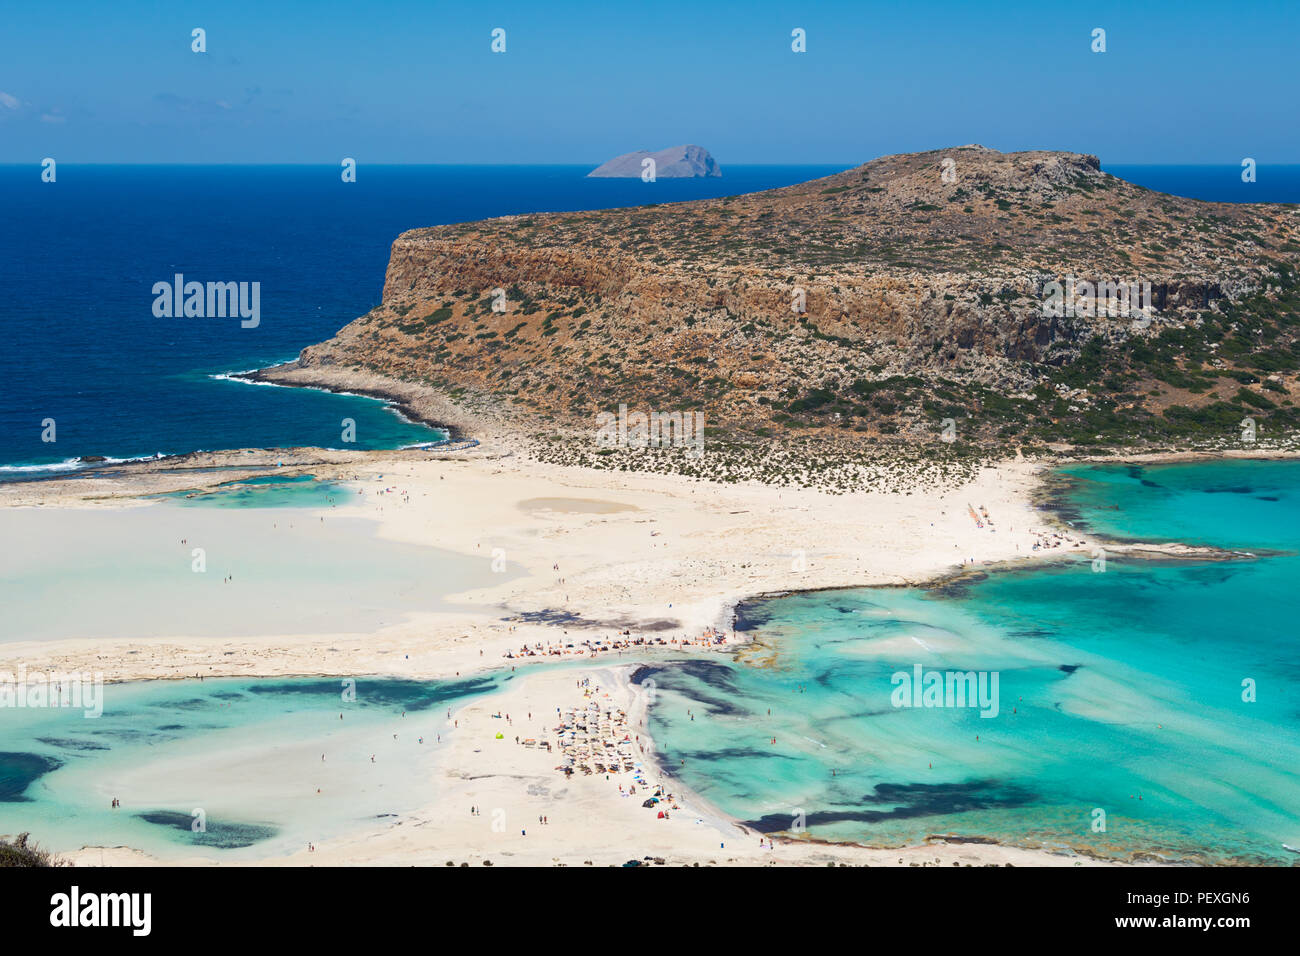 The Balos Beach, which is situated in the north-west side of the Crete island, is one of the most beautiful landscapes, our nature has ever created! Stock Photo